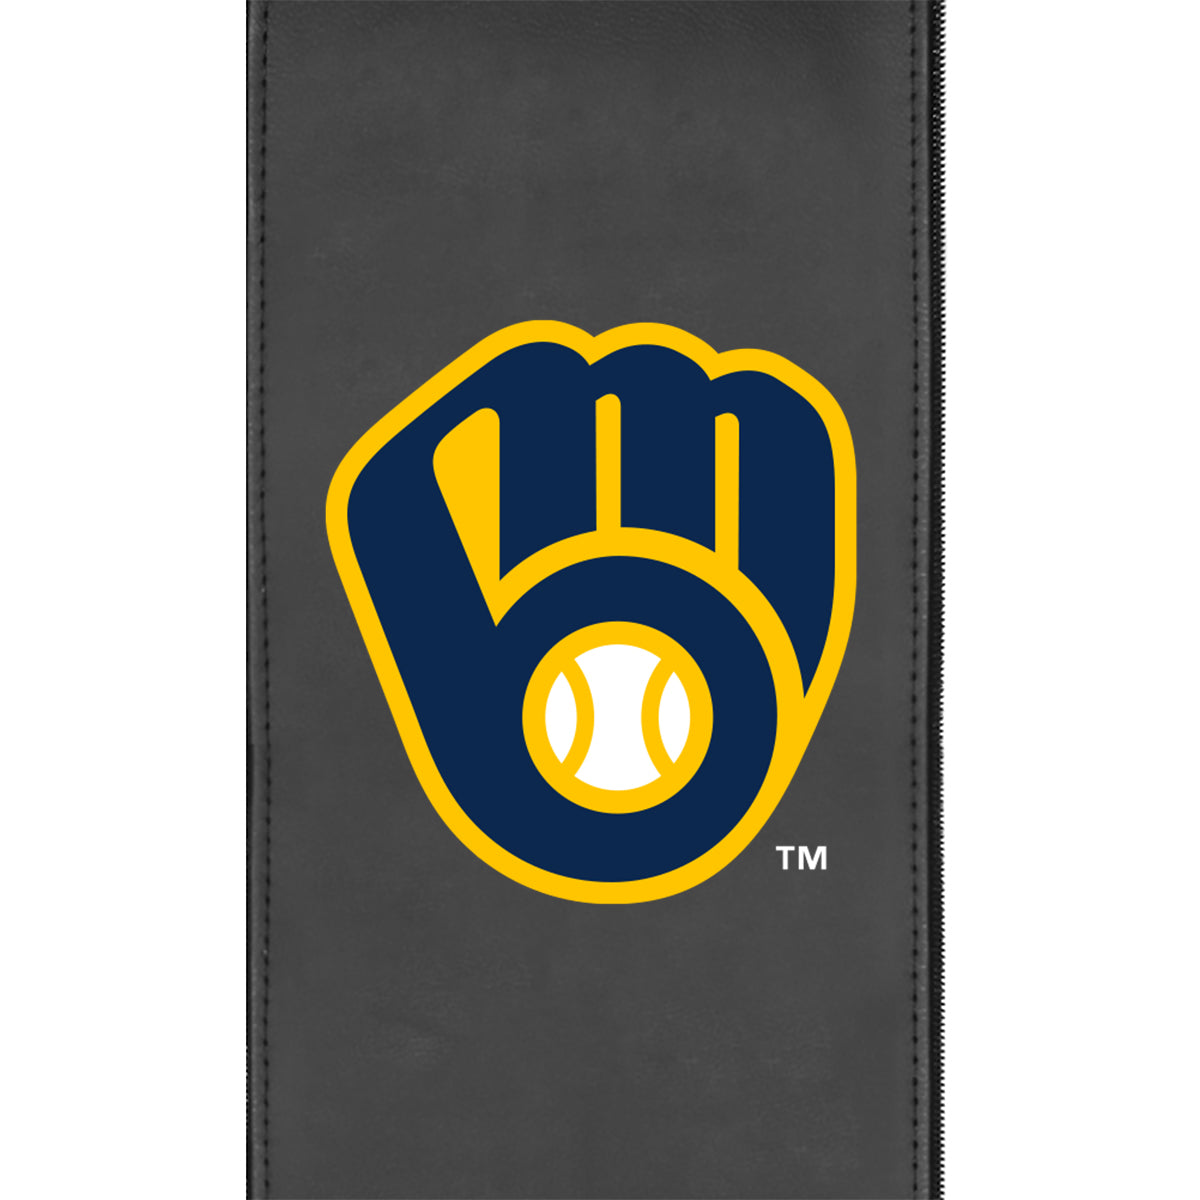 Relax Home Theater Recliner with Milwaukee Brewers Alternate Logo